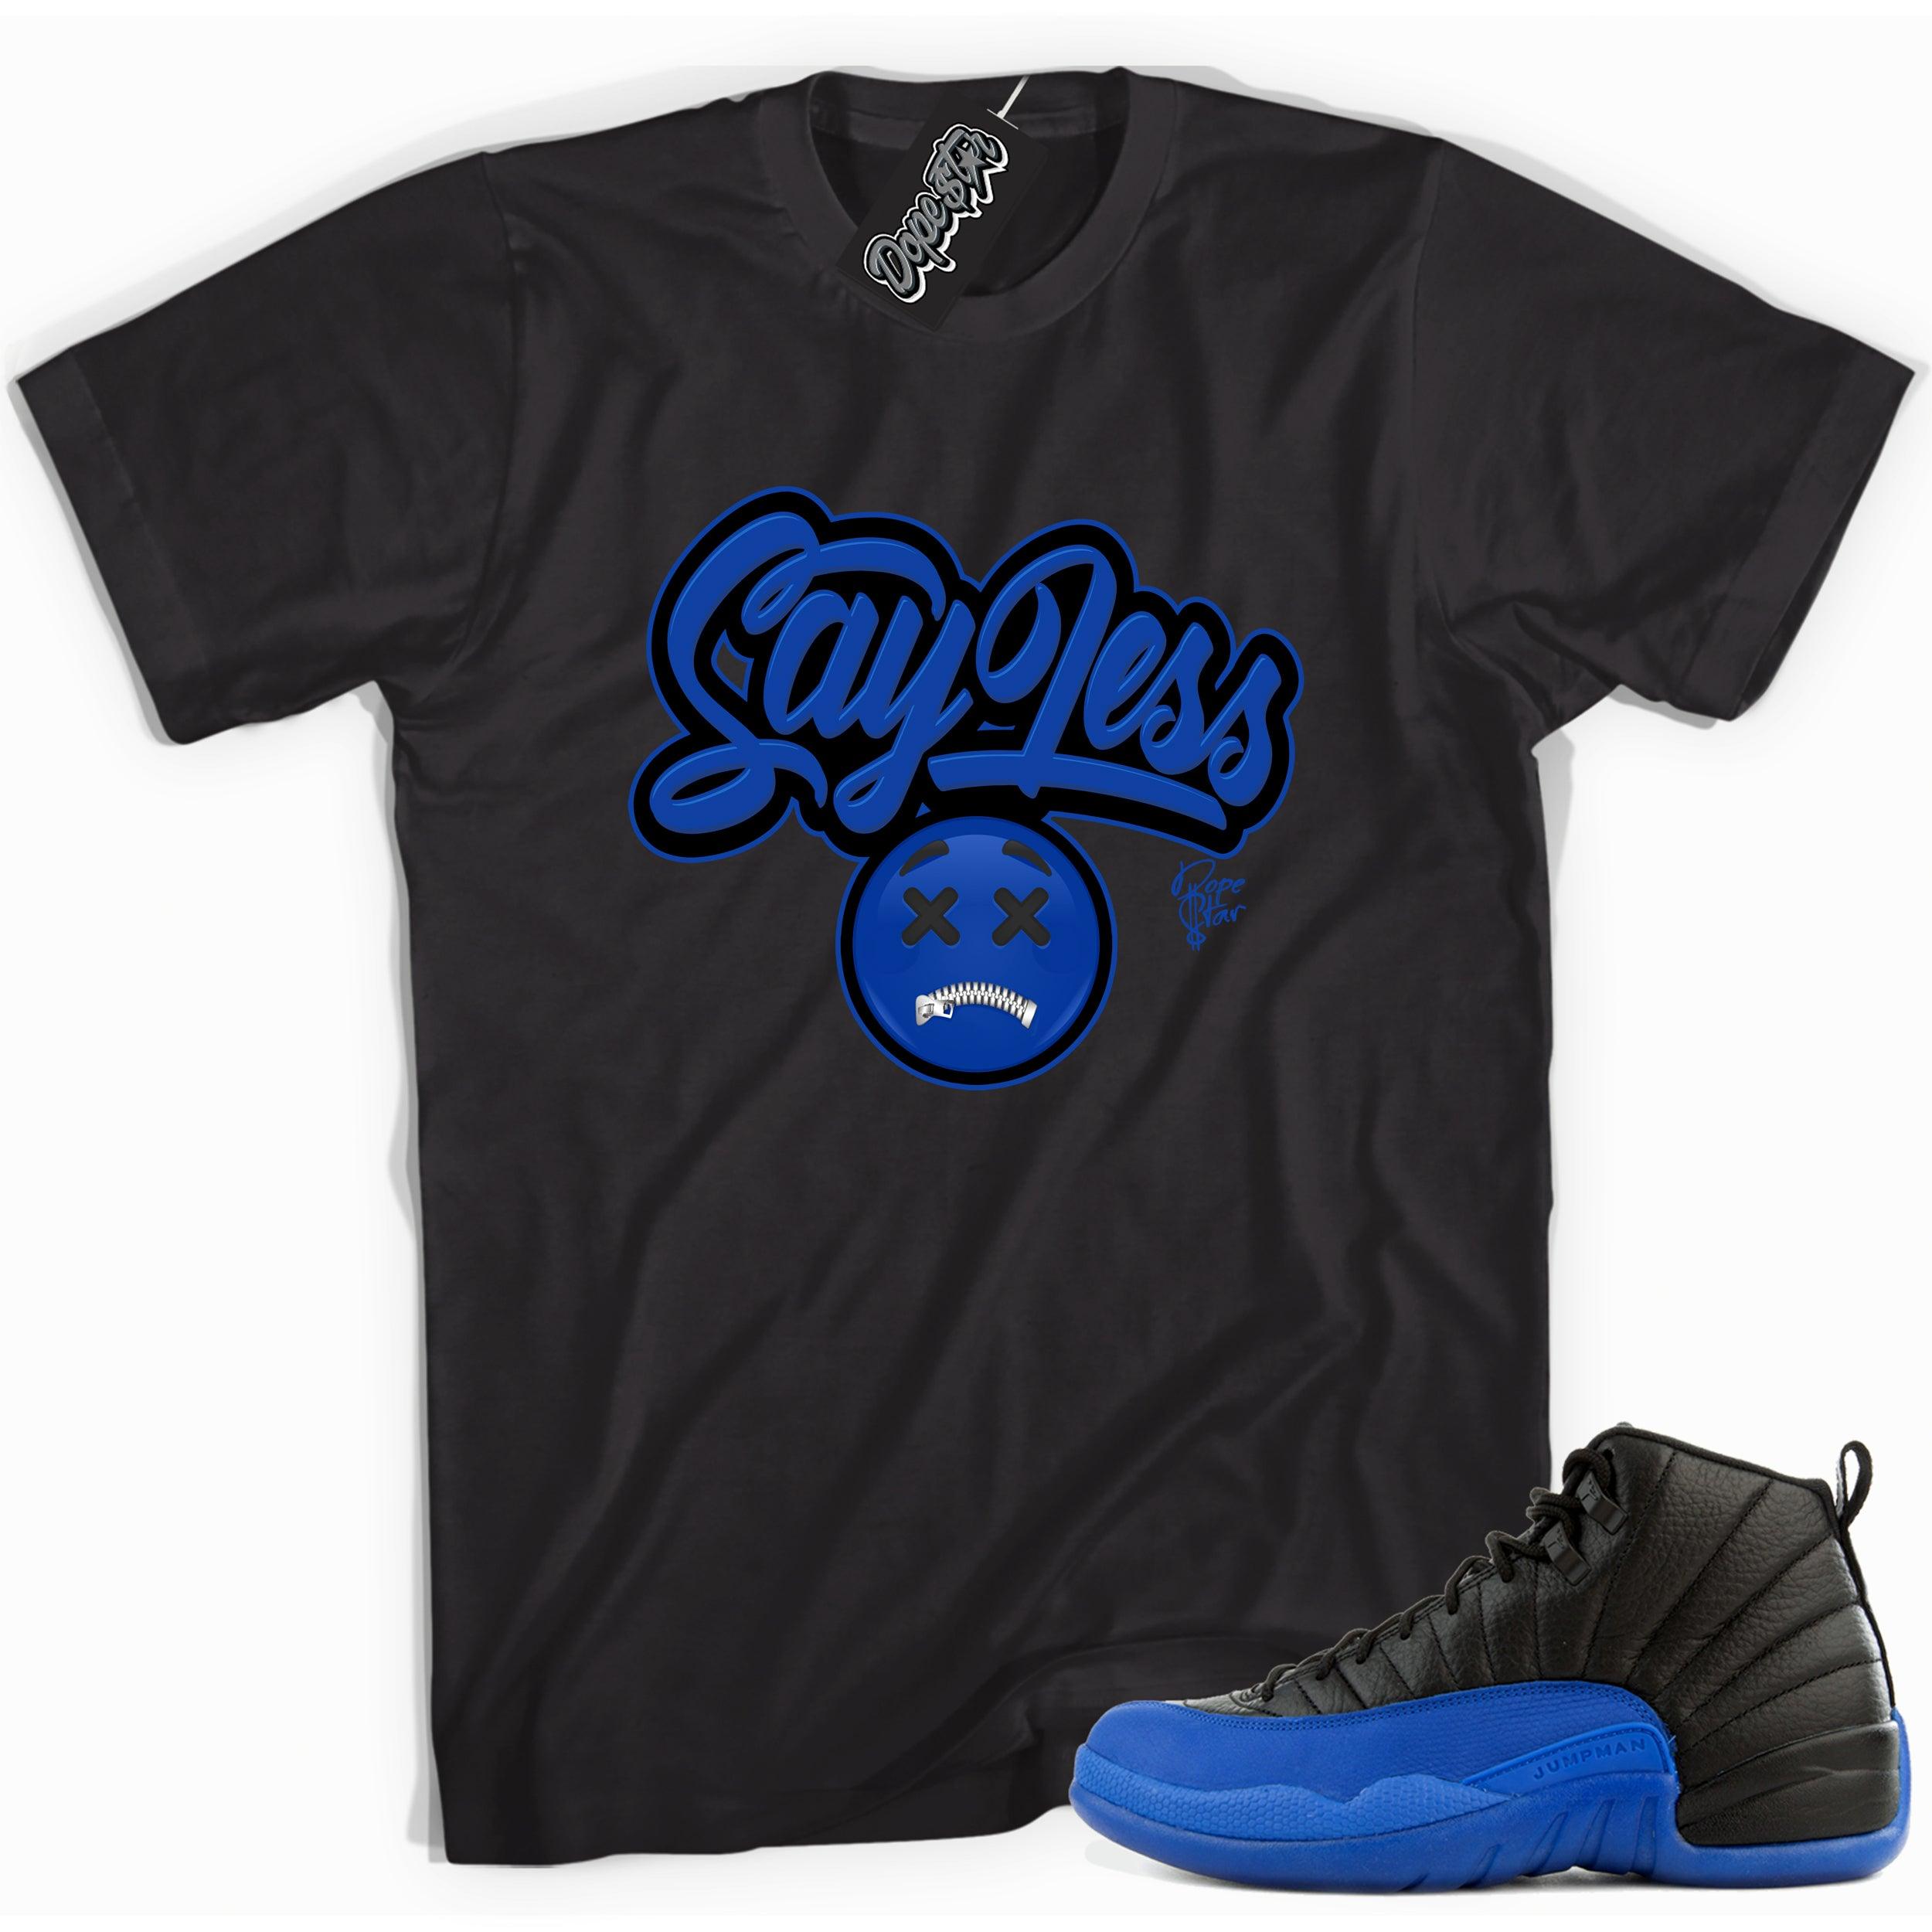 Cool black graphic tee with 'say less' print, that perfectly matches  Air Jordan 12 Retro Black Game Royal sneakers.